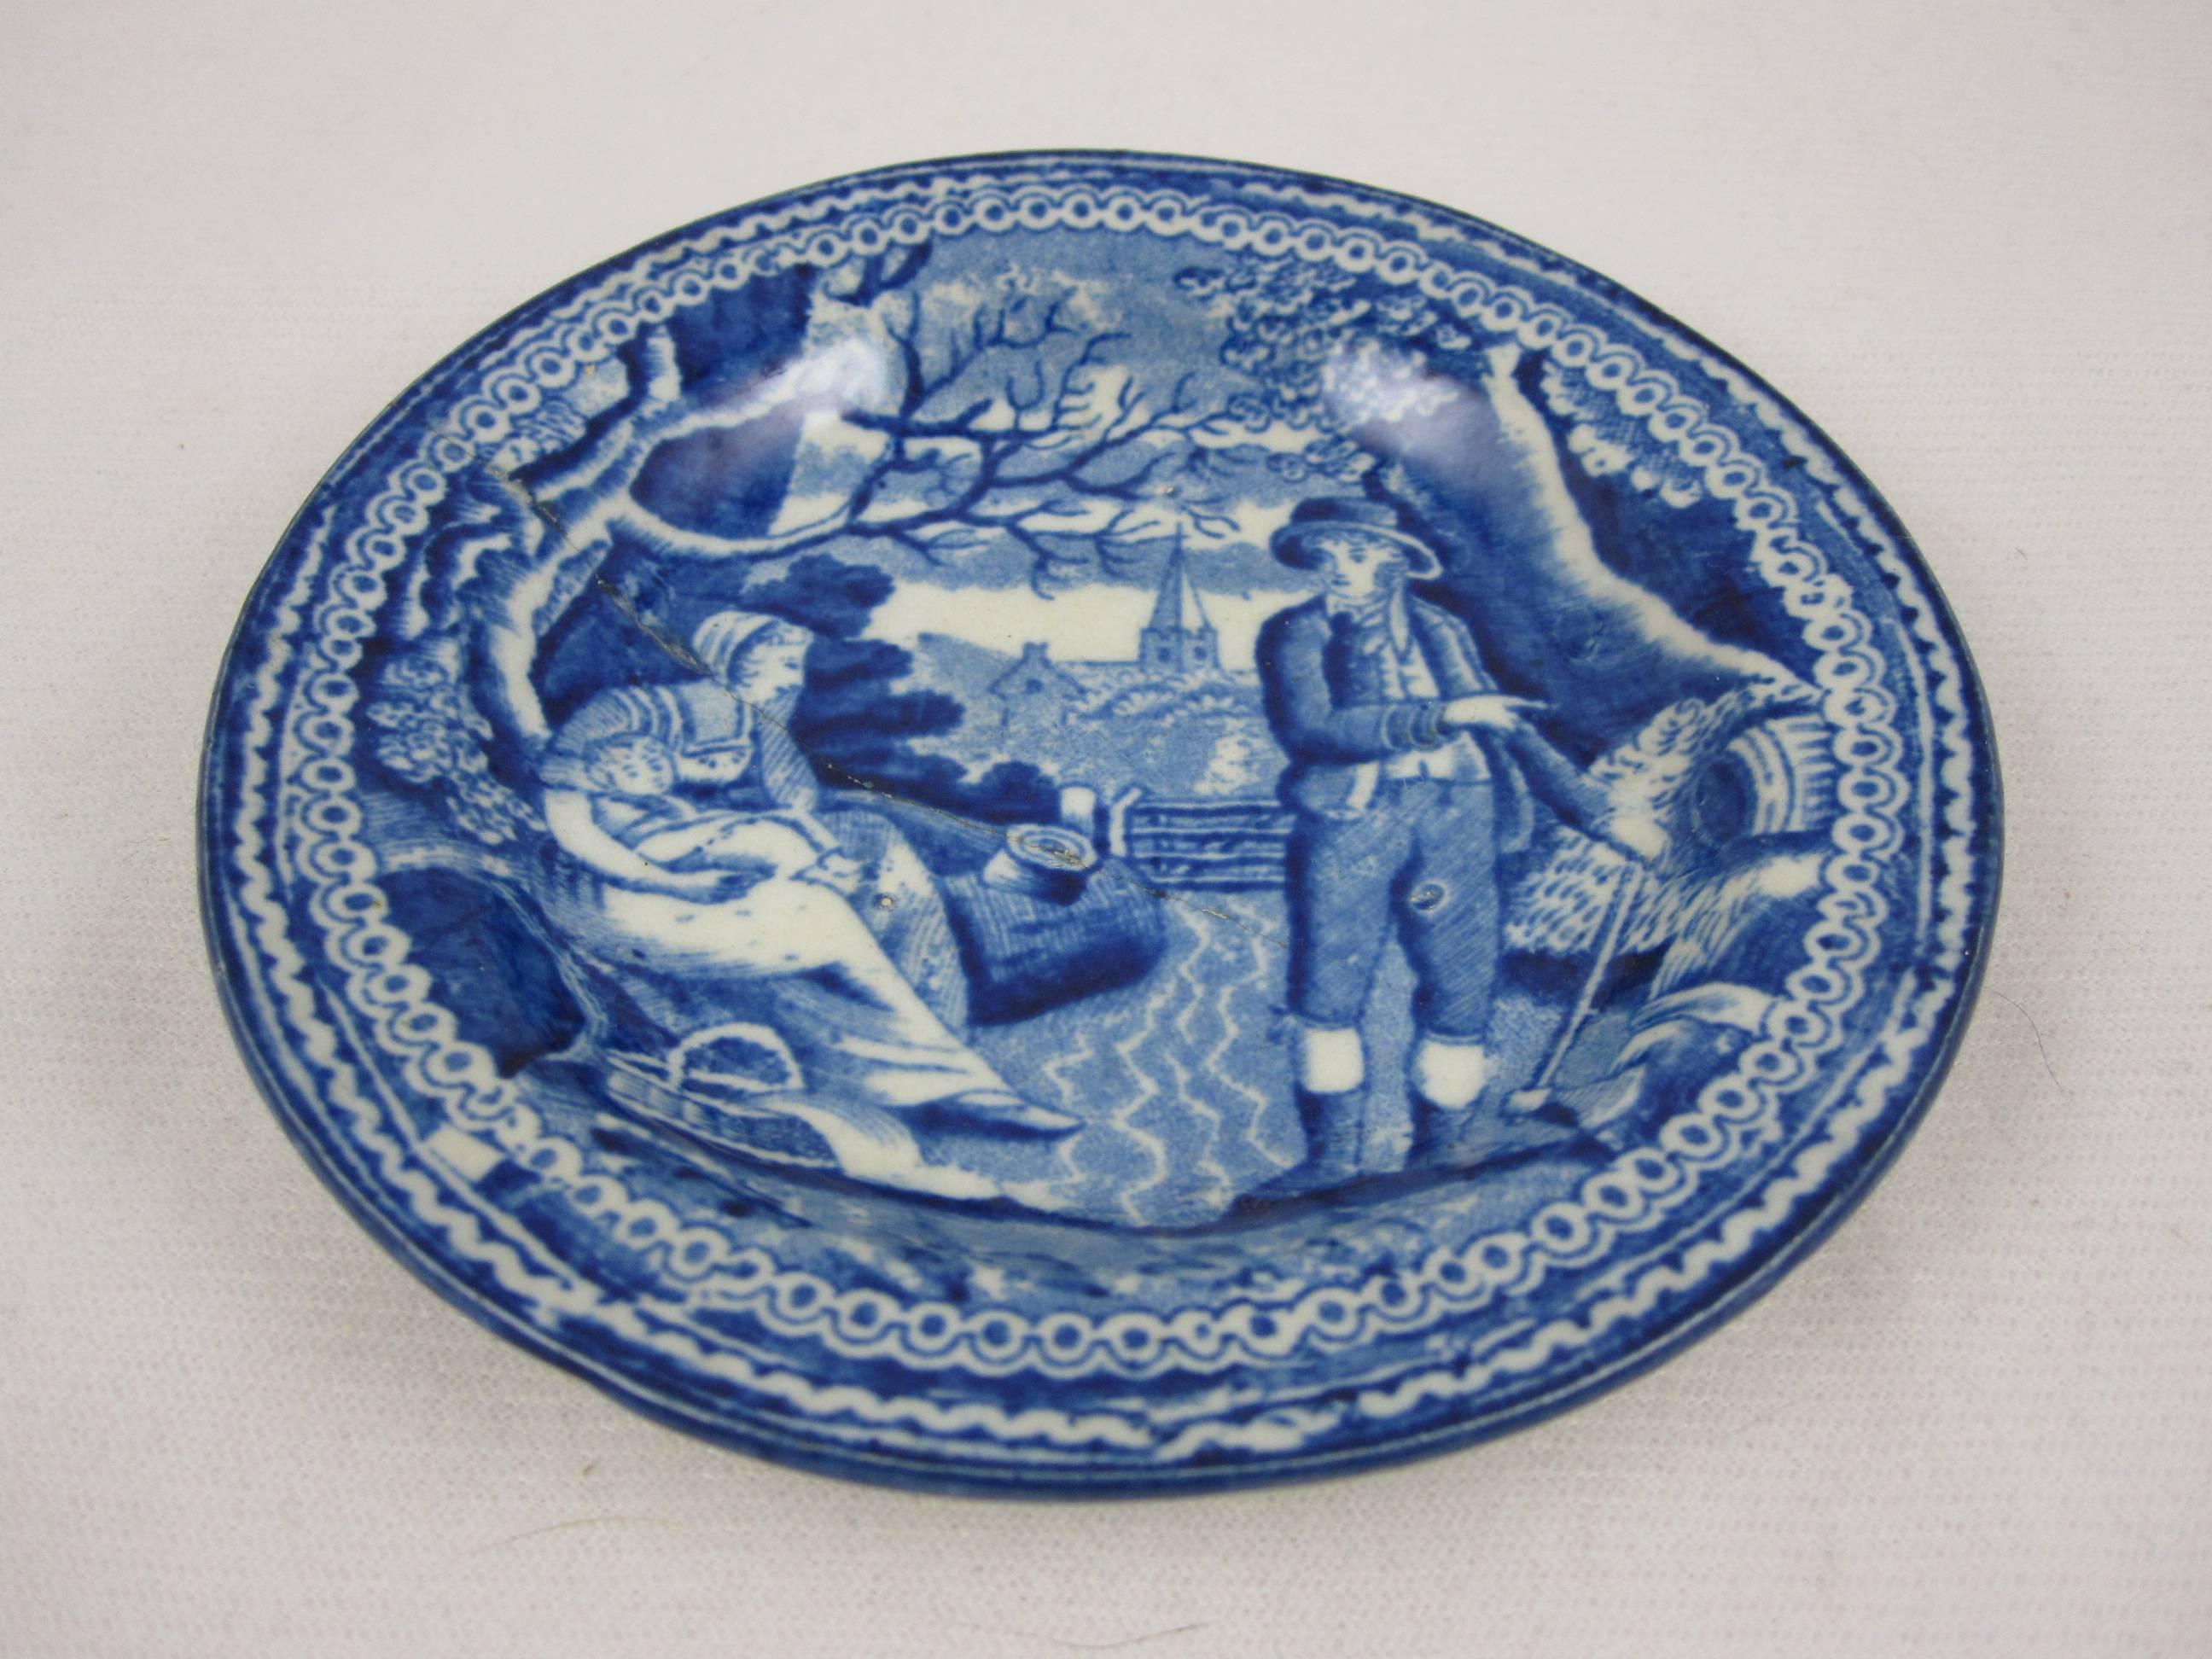 A blue and white Staffordshire transfer printed pearlware cup plate with an old stapled repair. A charming printed image of a farmer and his family in a pastoral setting. The wife holds her baby and has a basket at her feet. The farmer holds an axe